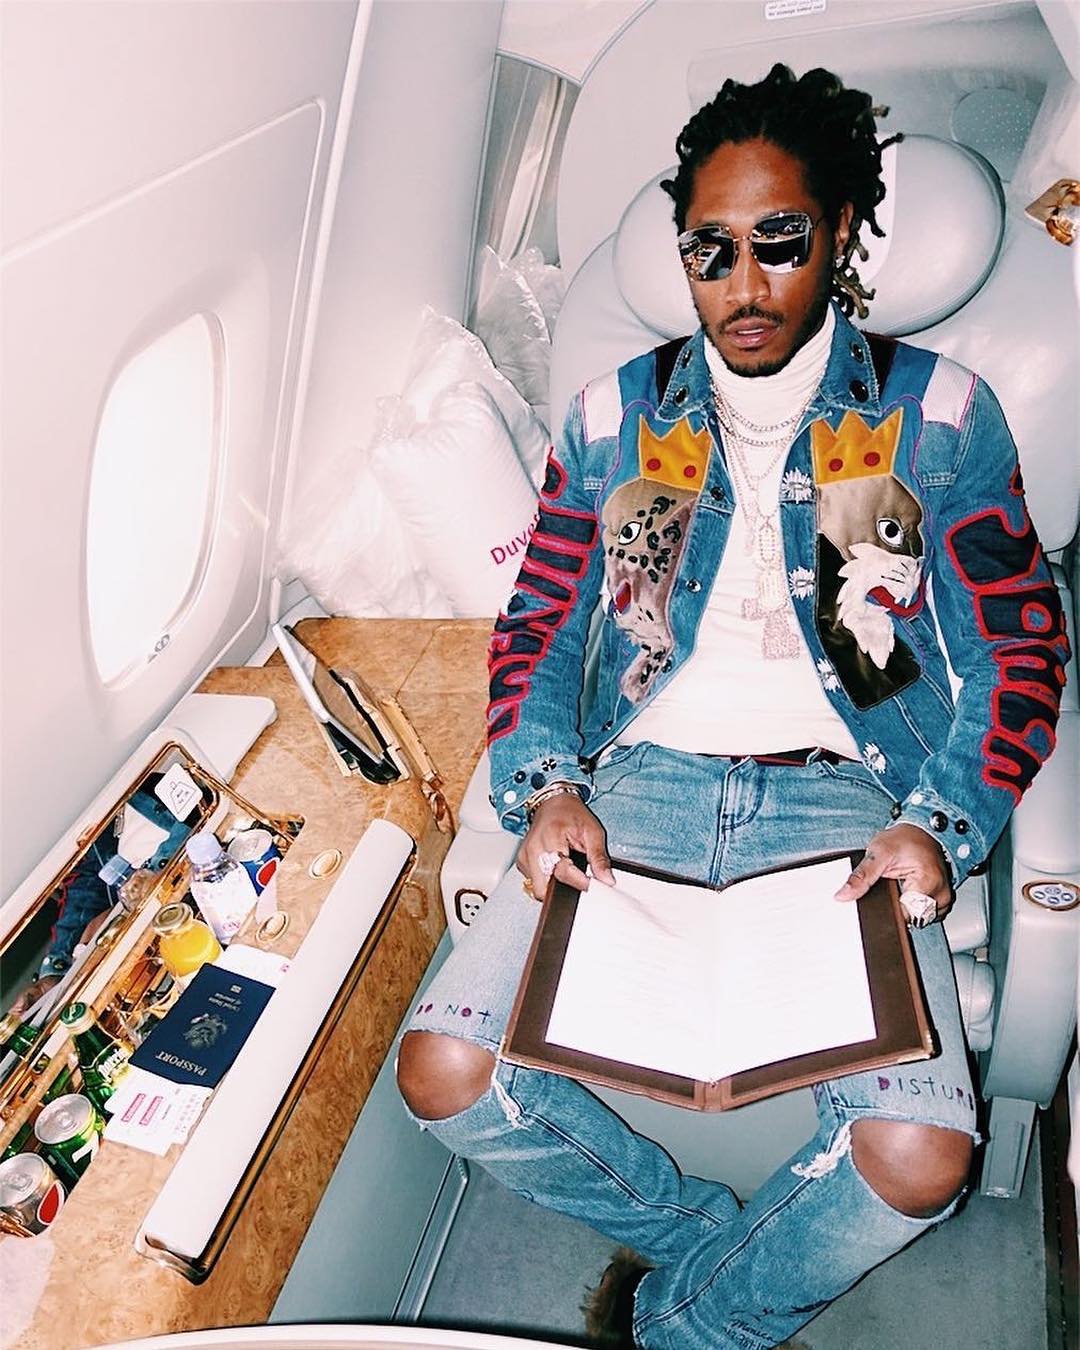 SPOTTED: Future in Dolce & Gabbana and RtA Brand